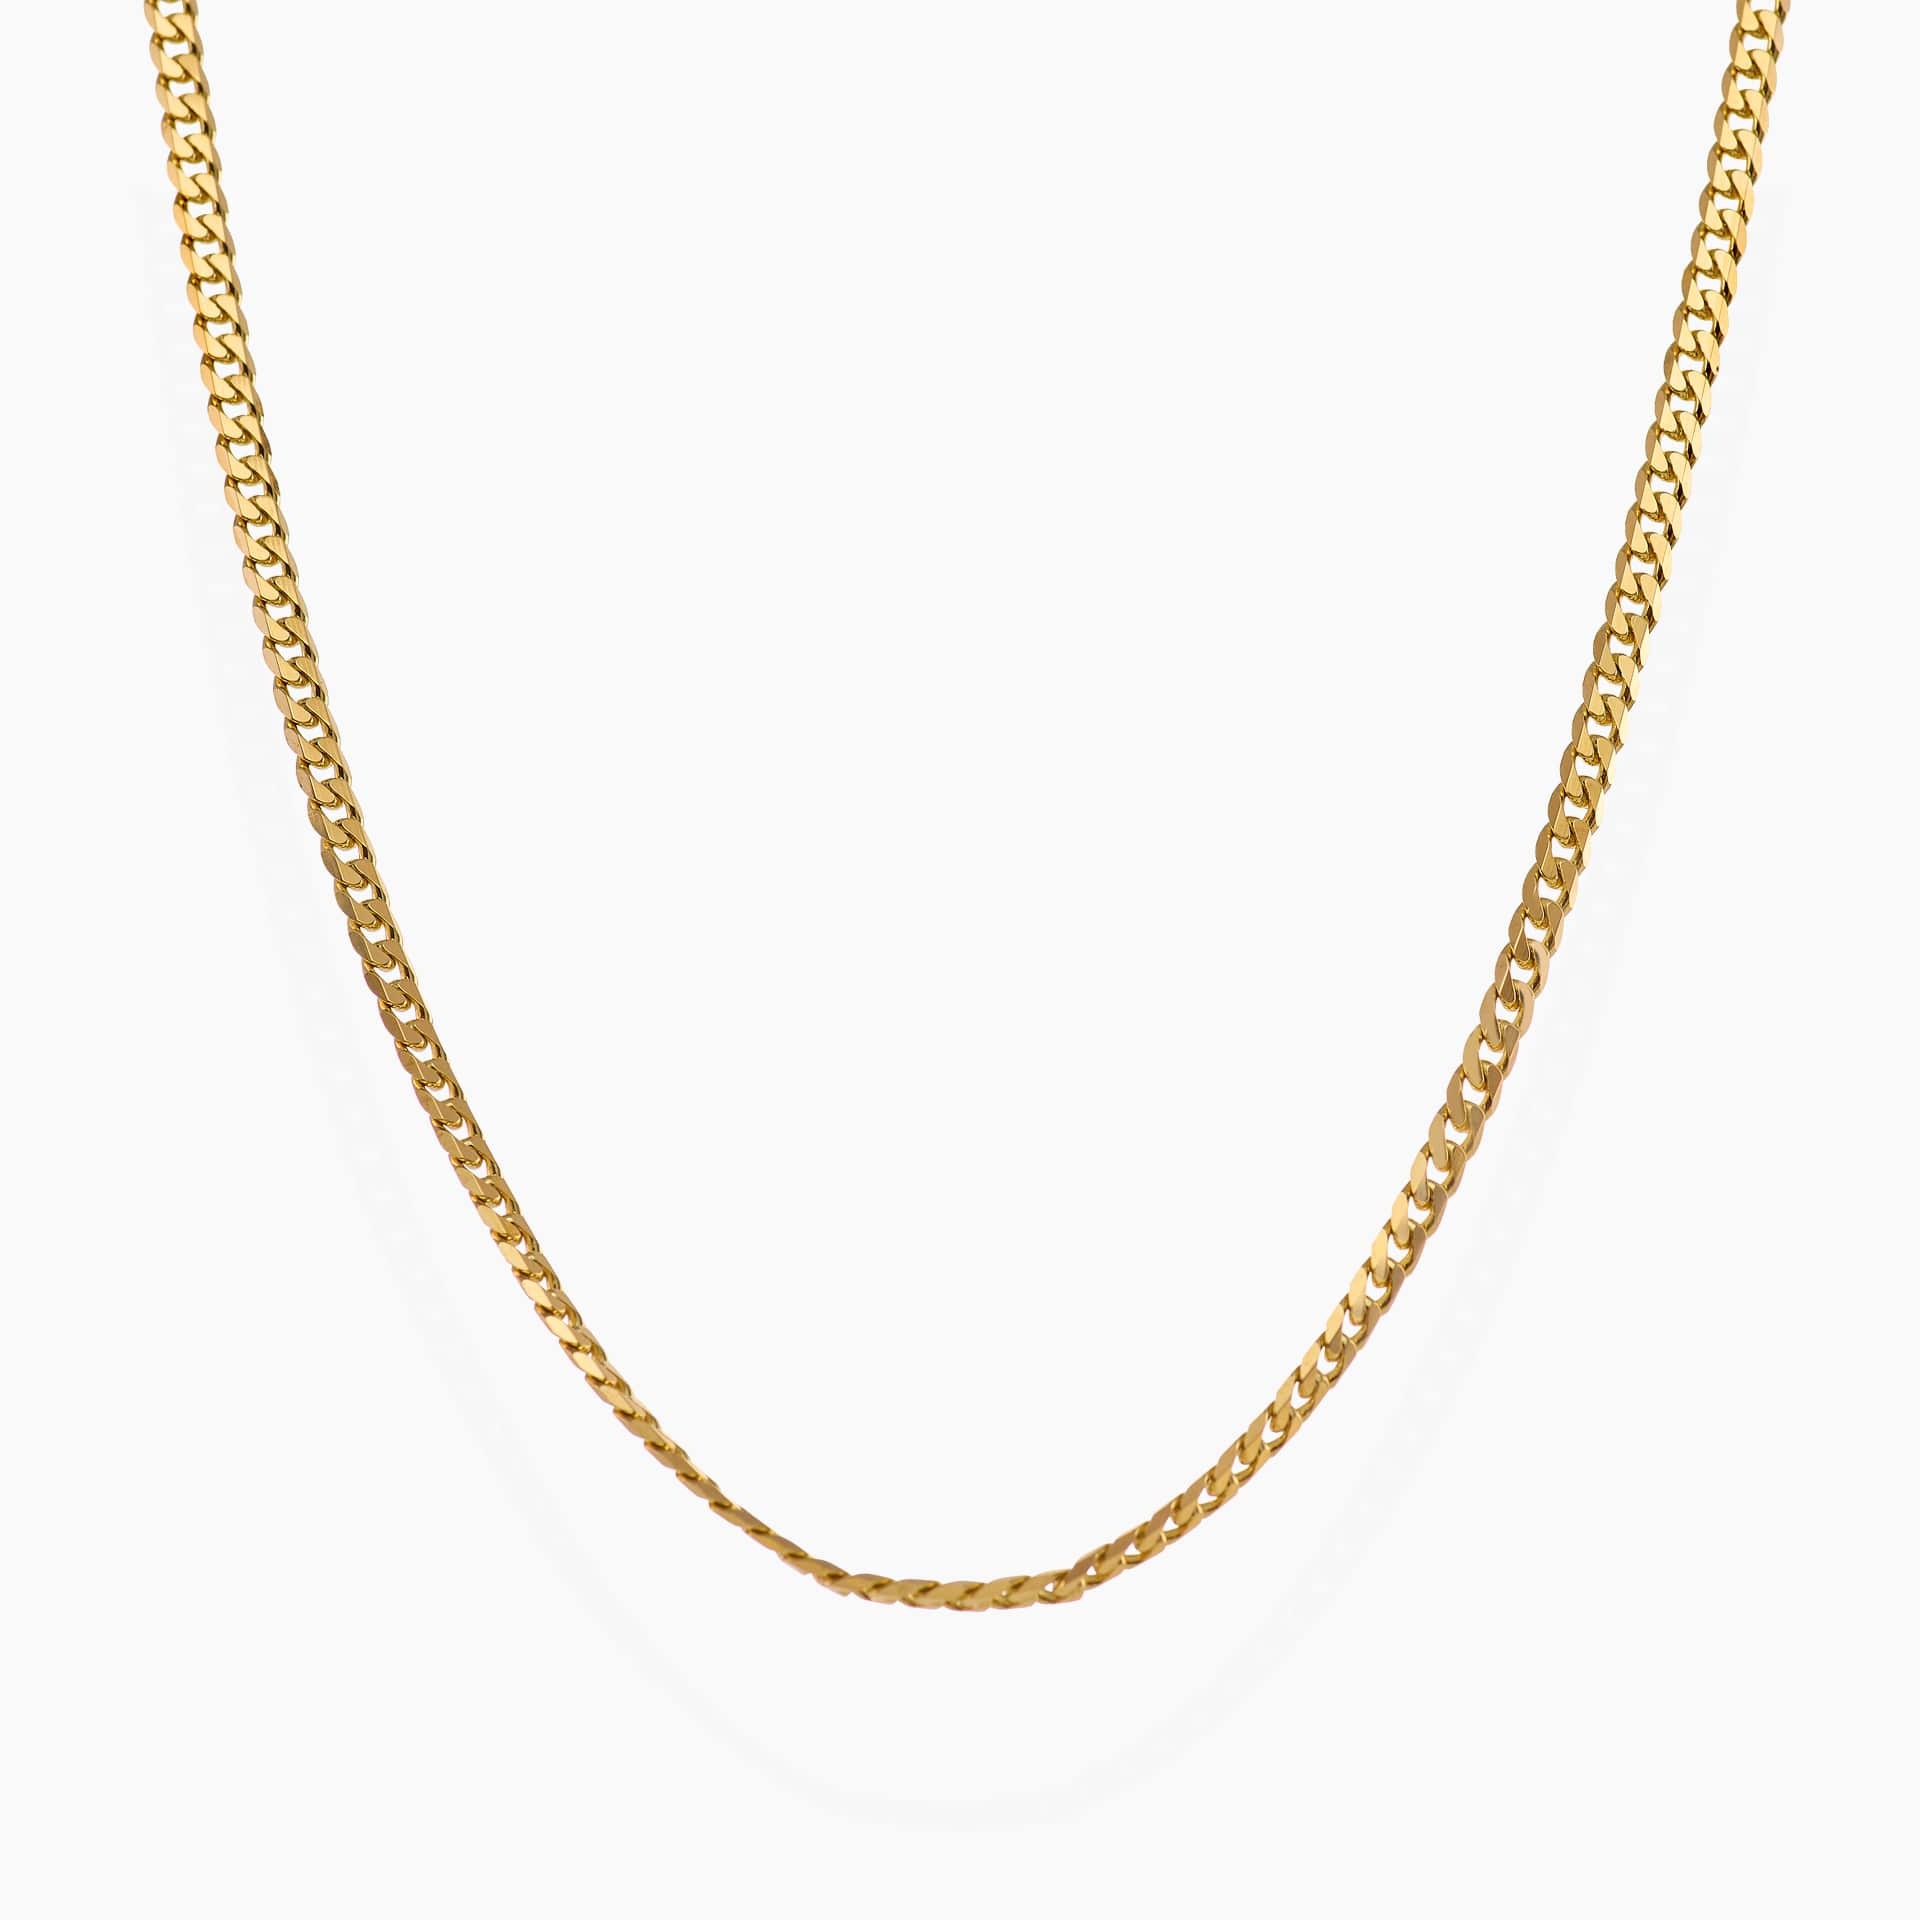 18ct yellow gold 50cm flat curb link chain | Cerrone Jewellers